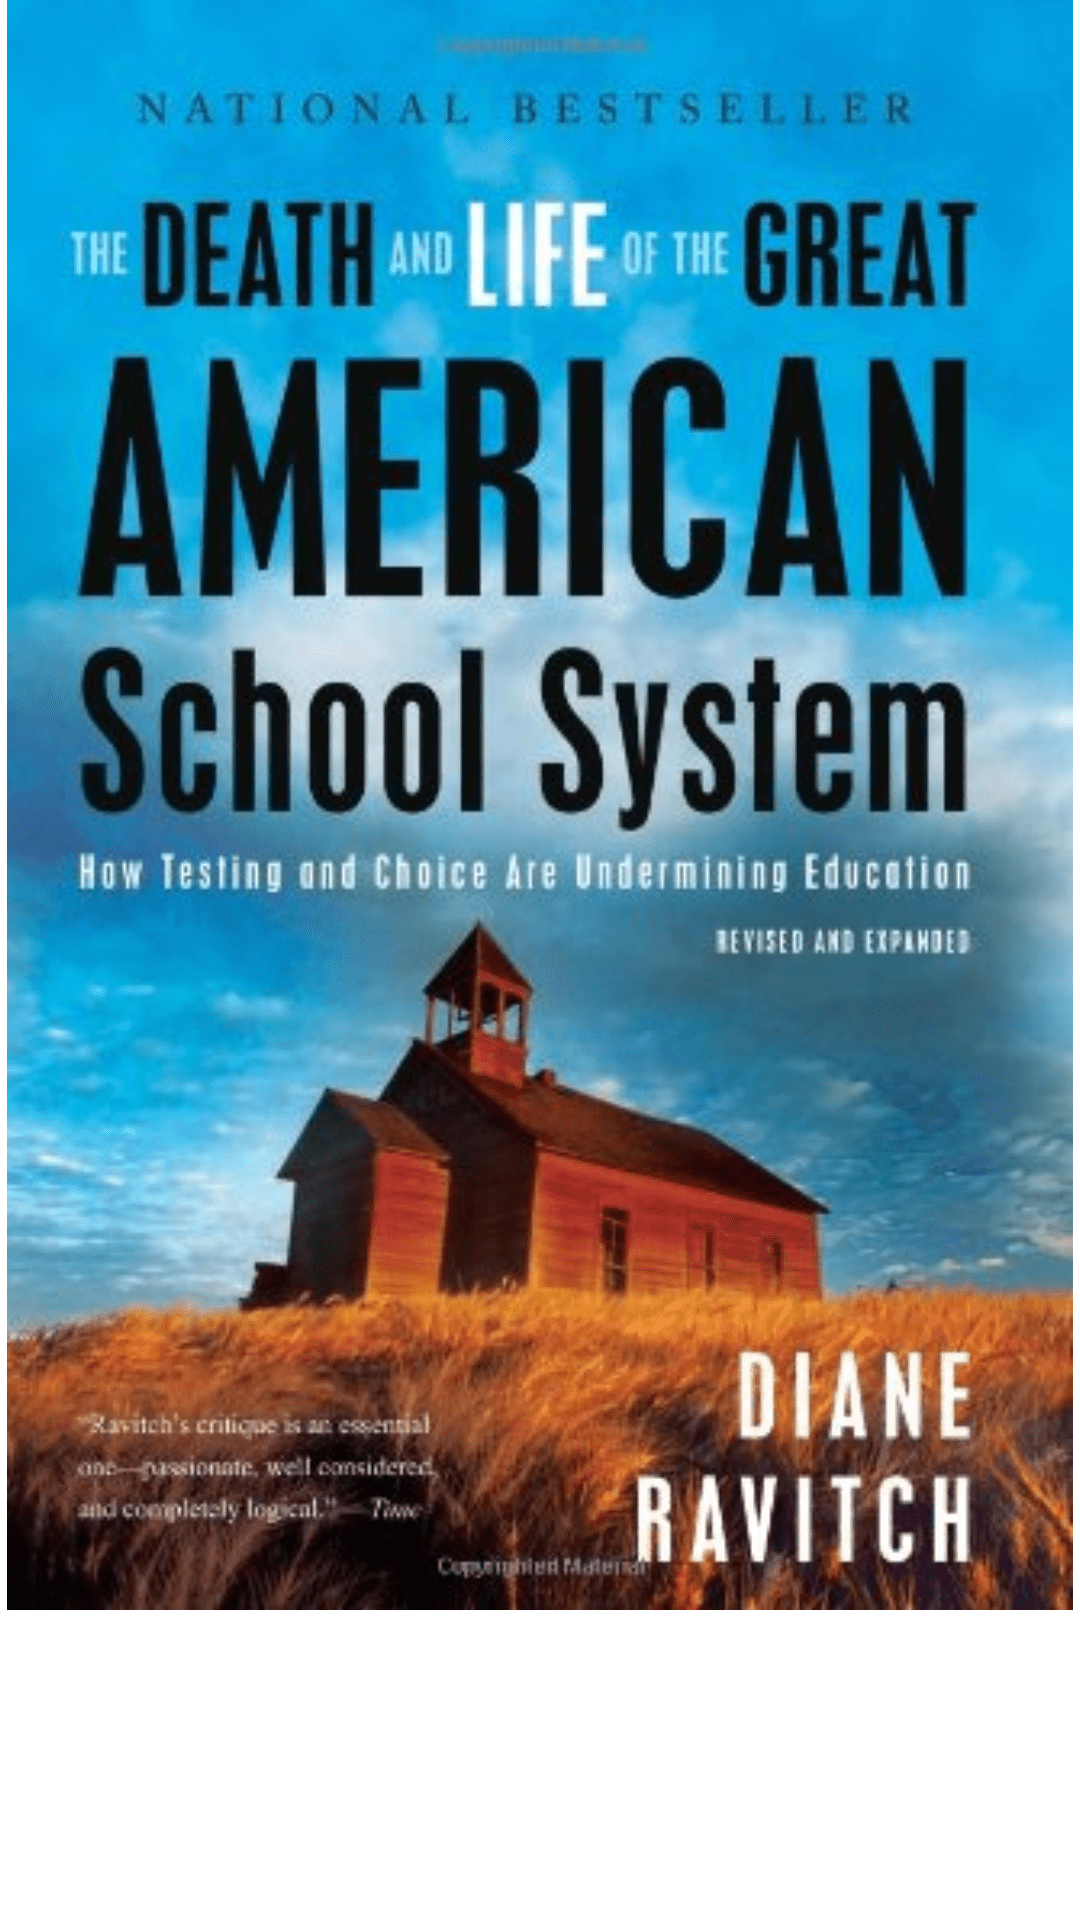 The Death and Life of Great American School System : How Testing and Choice are Undermining Education